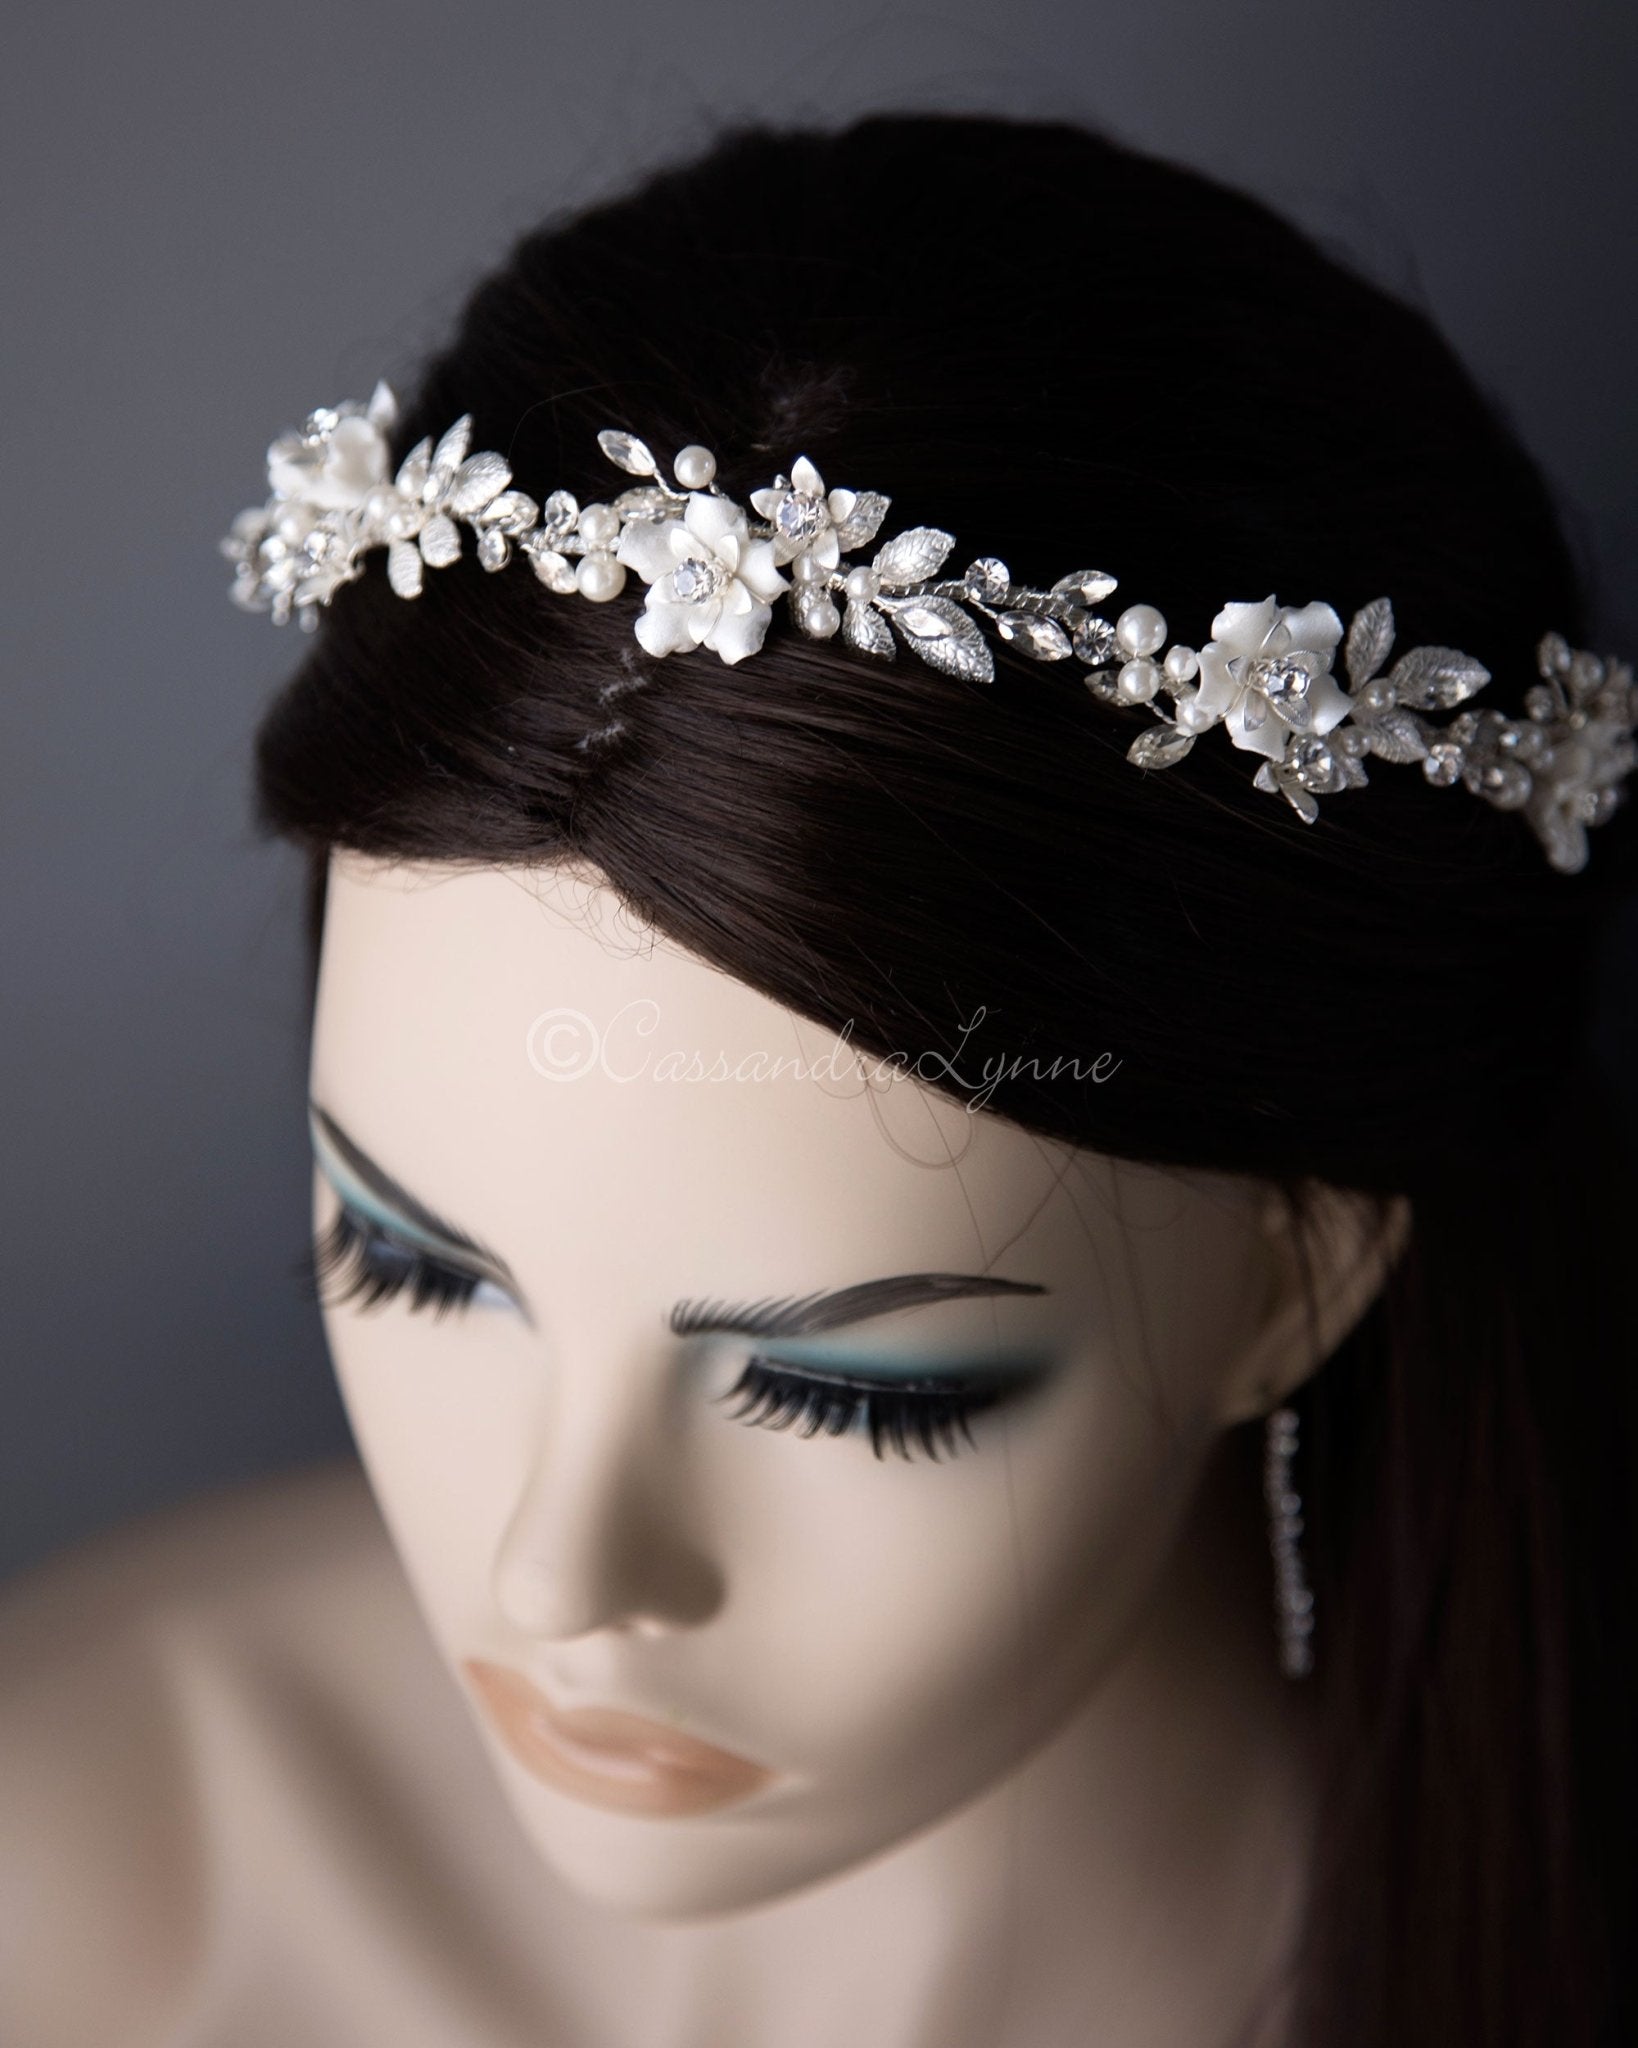 Be Something New Wedding Veil Tie Headband with Pearls and Flowers